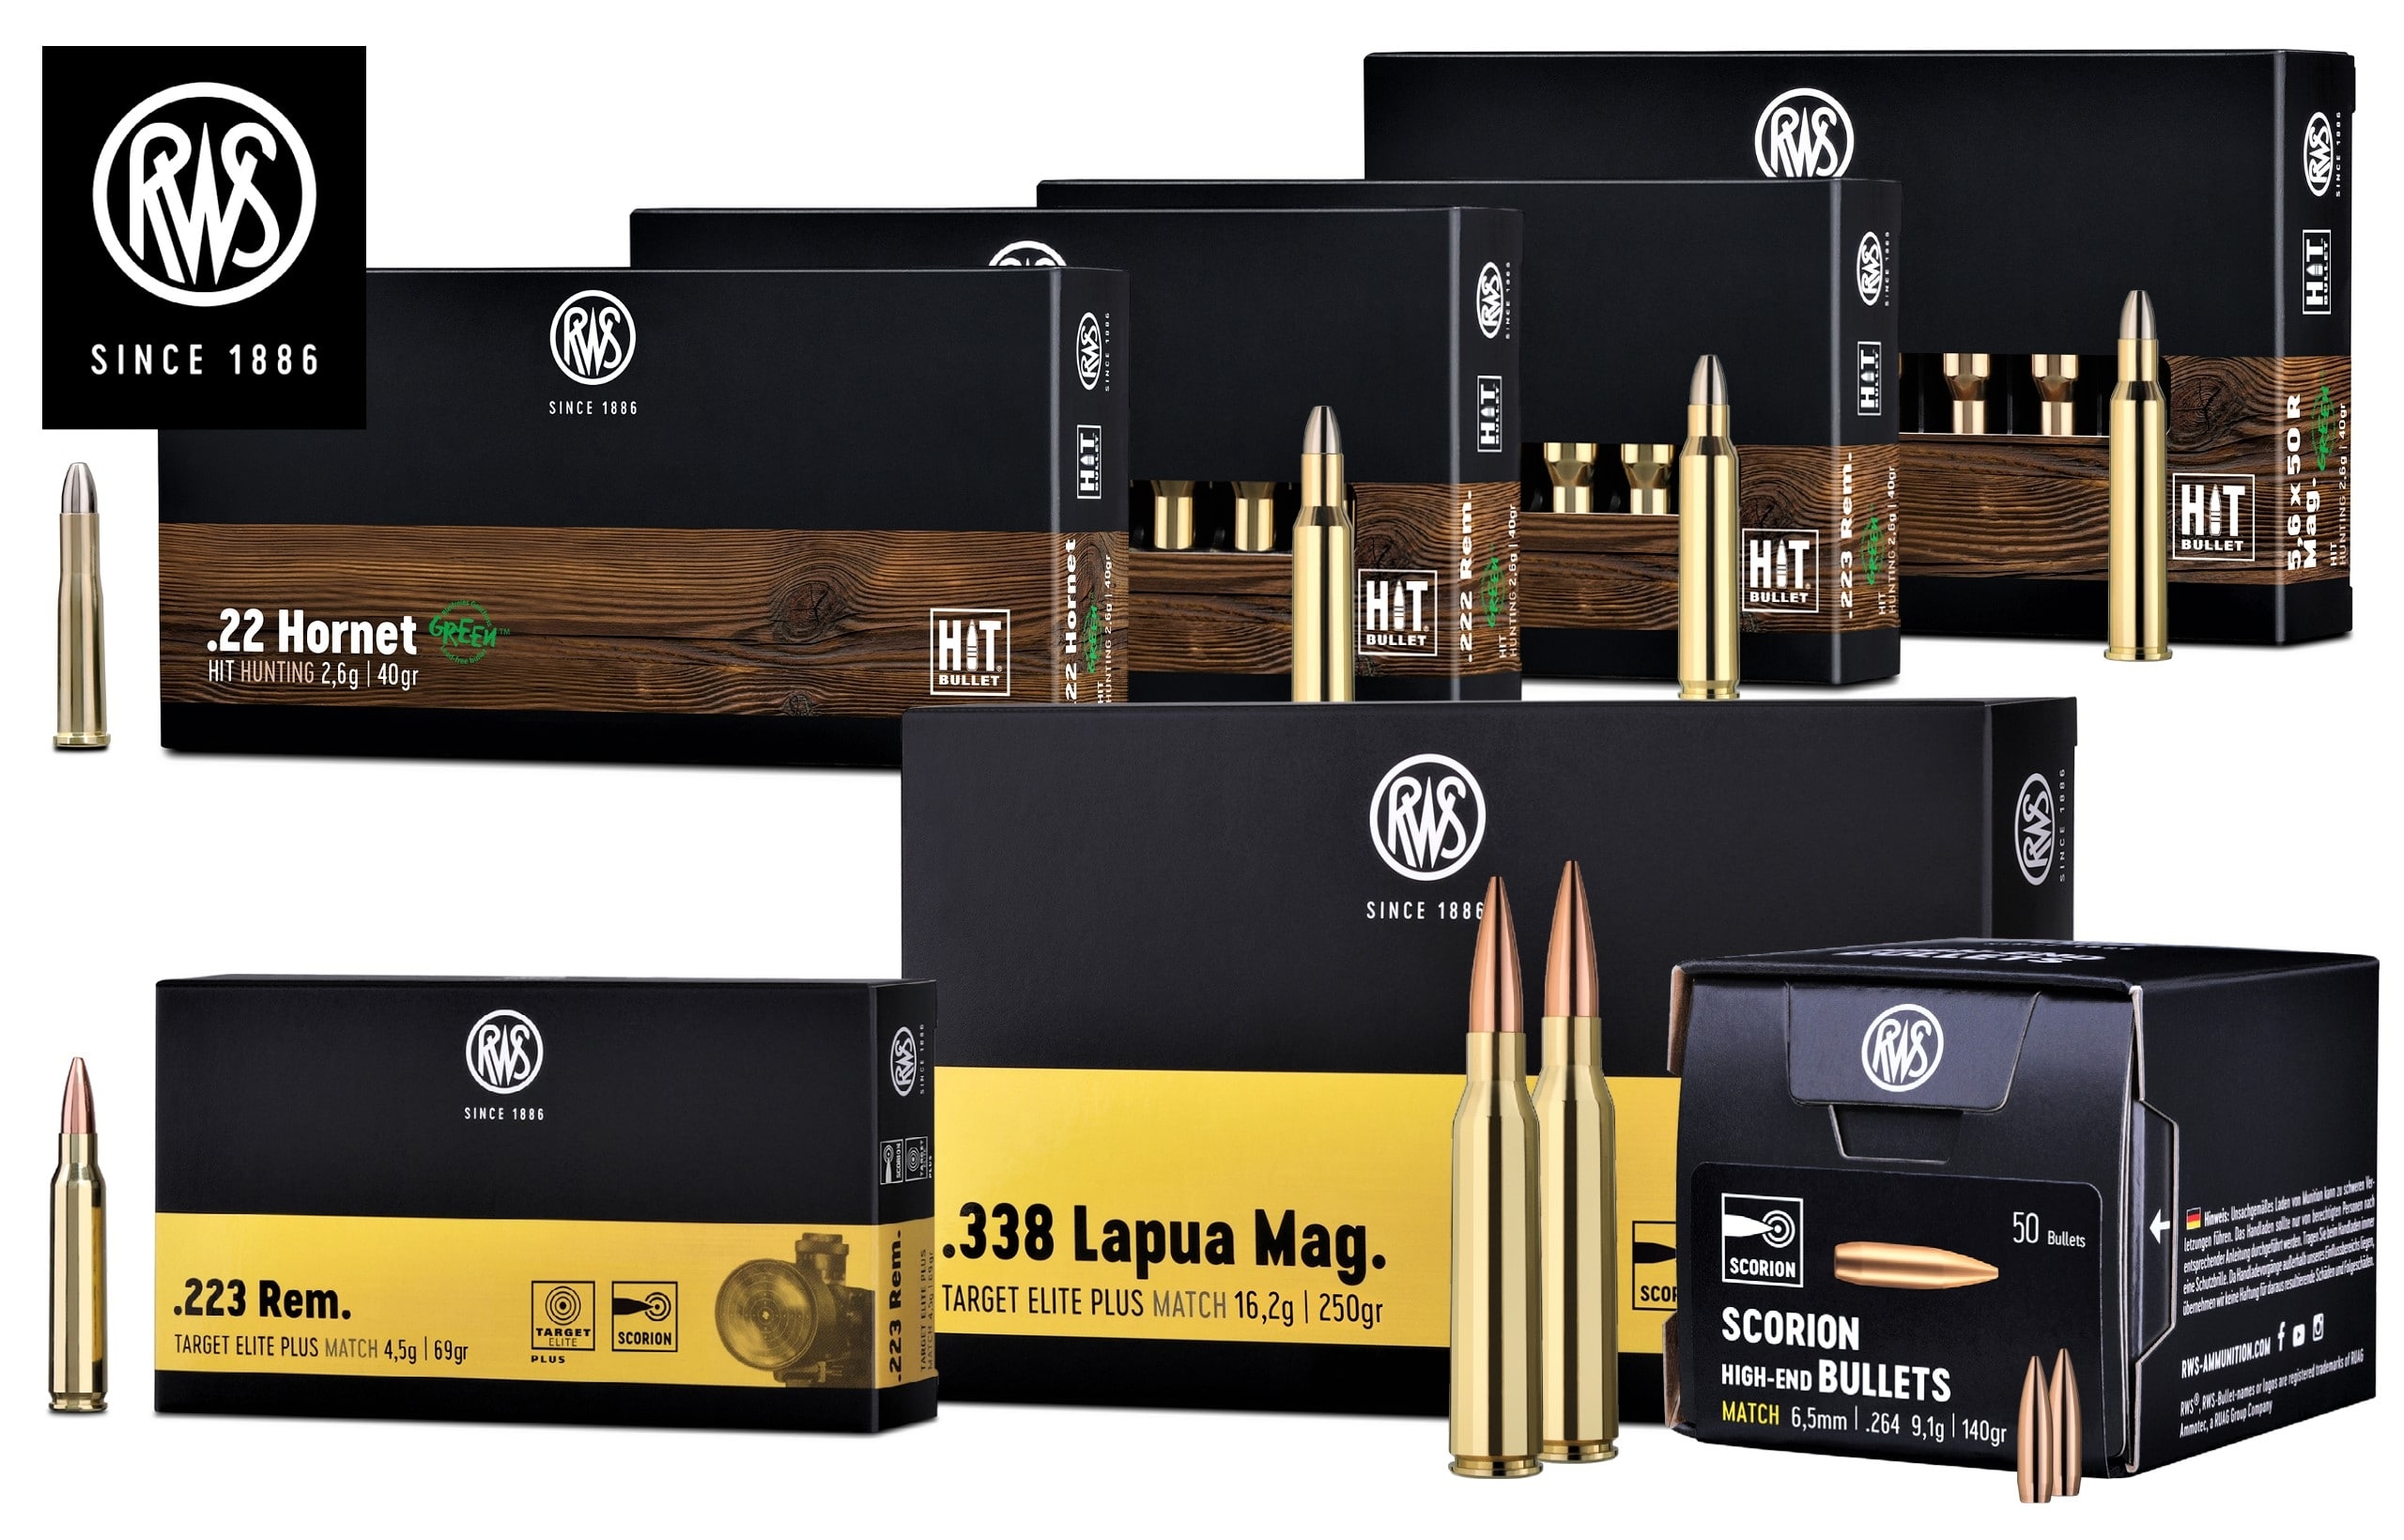 New ammo for 2021: new hunting and sporting cartridges from RWS